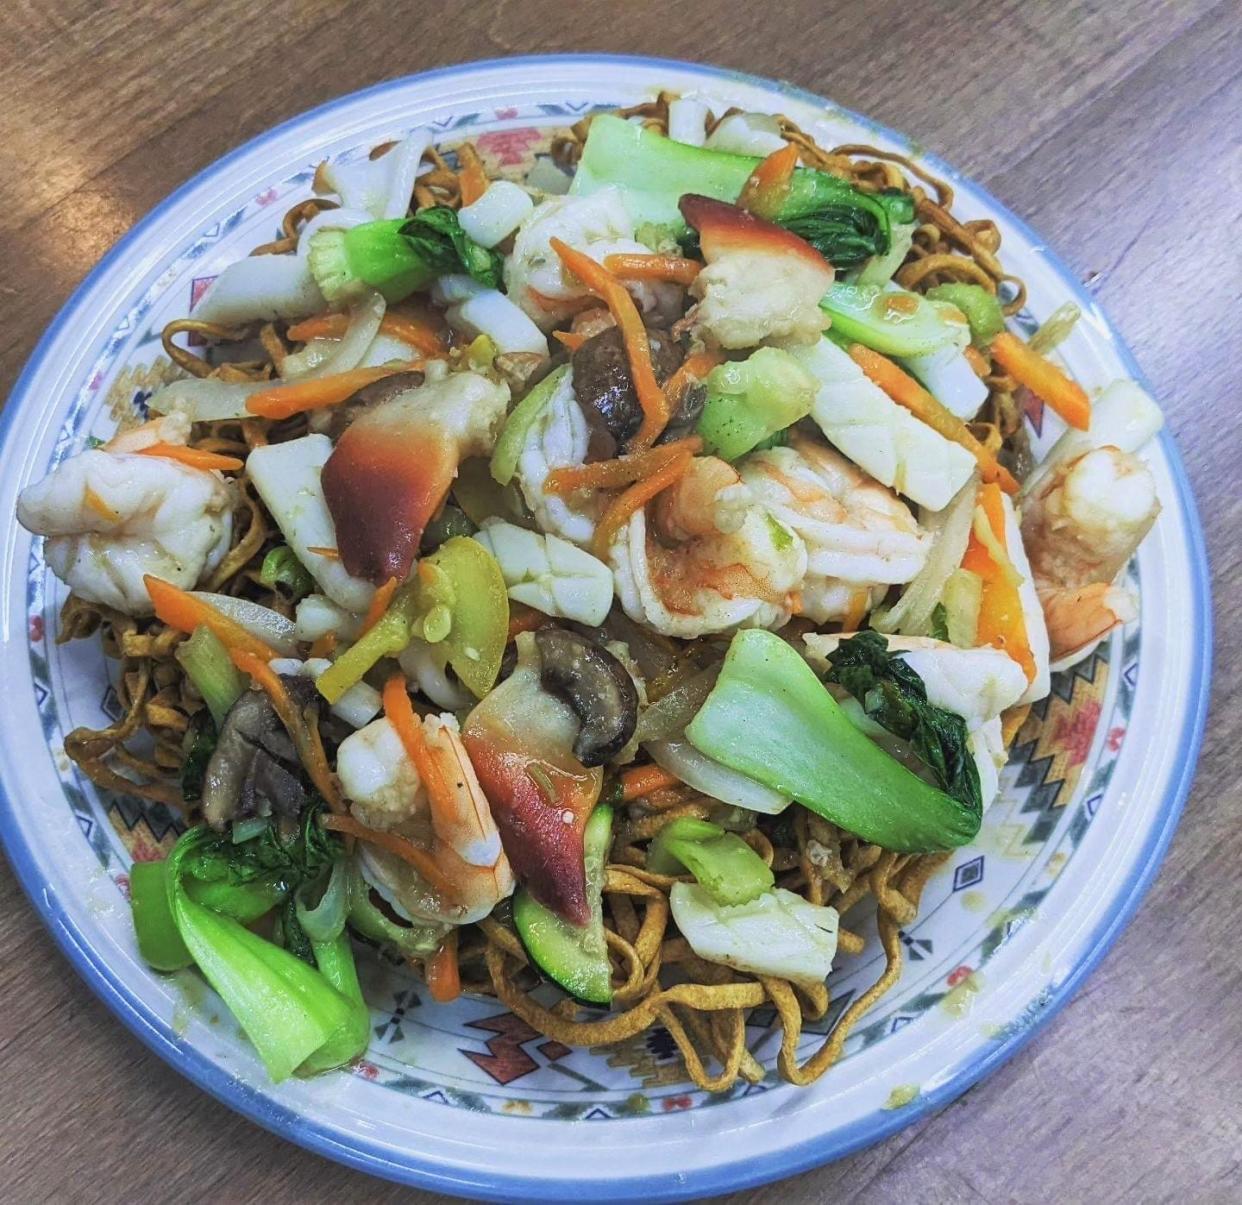 Seafood pan fried noodles from Wee's Cozy Kitchen at 2400 Rio Grande St.